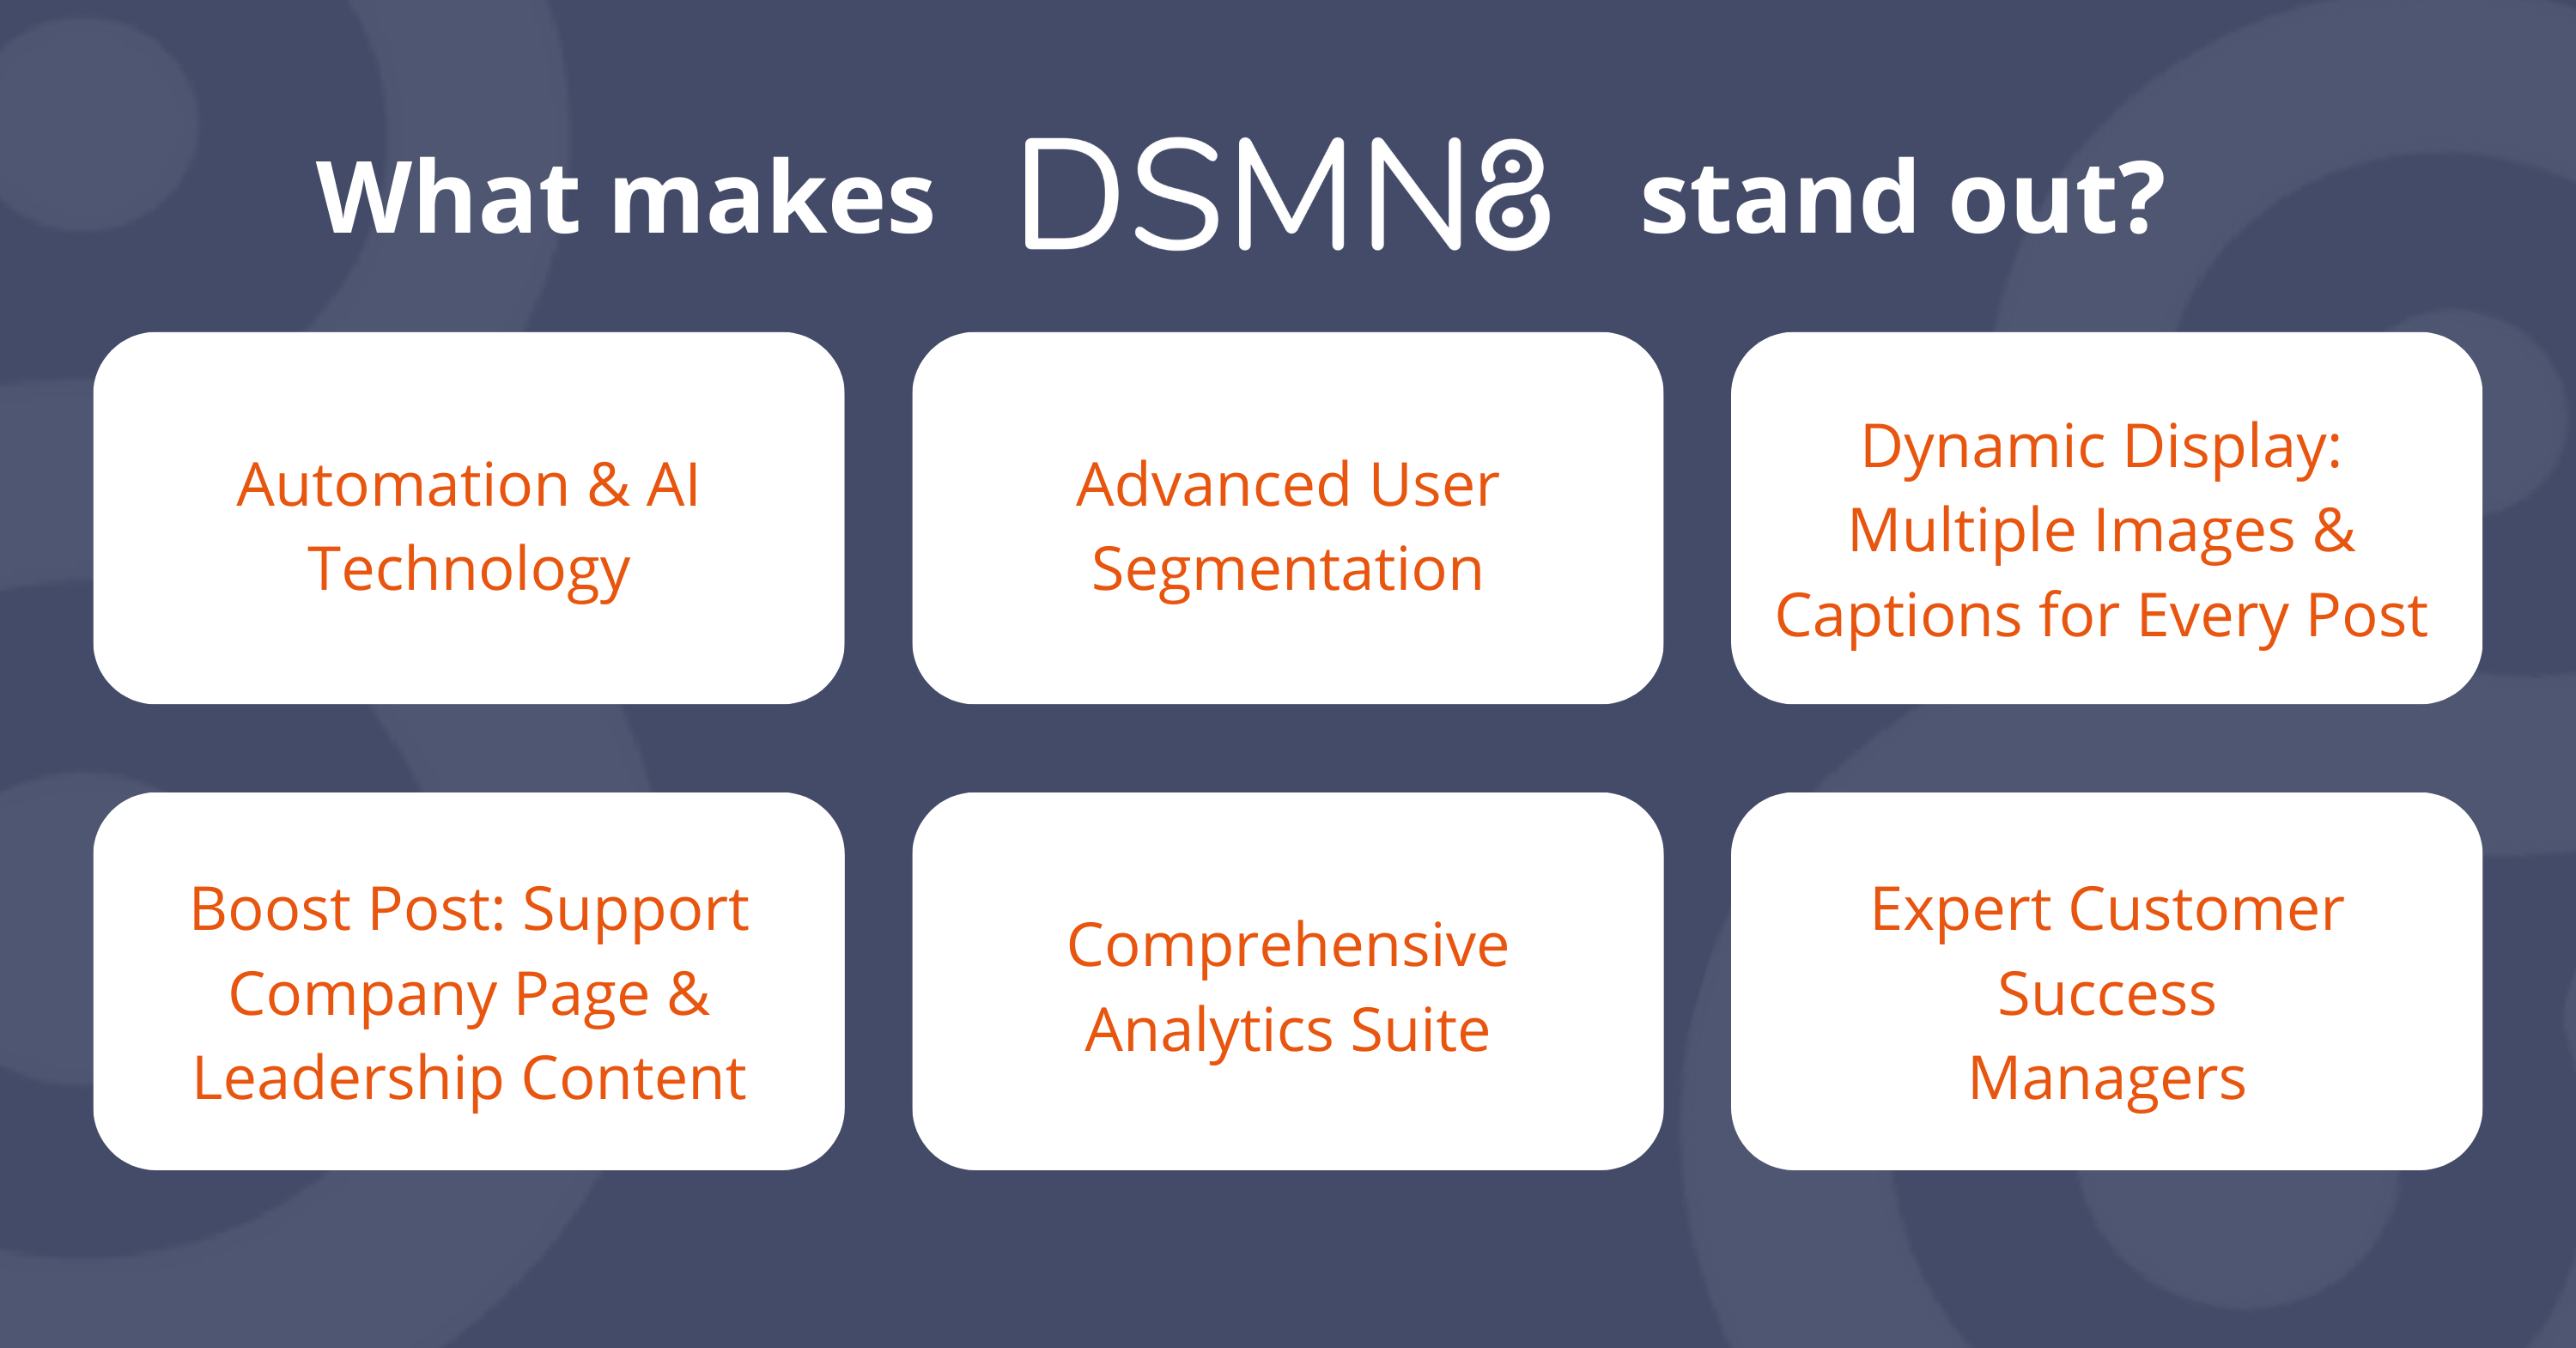 what makes DSMN8 stand out